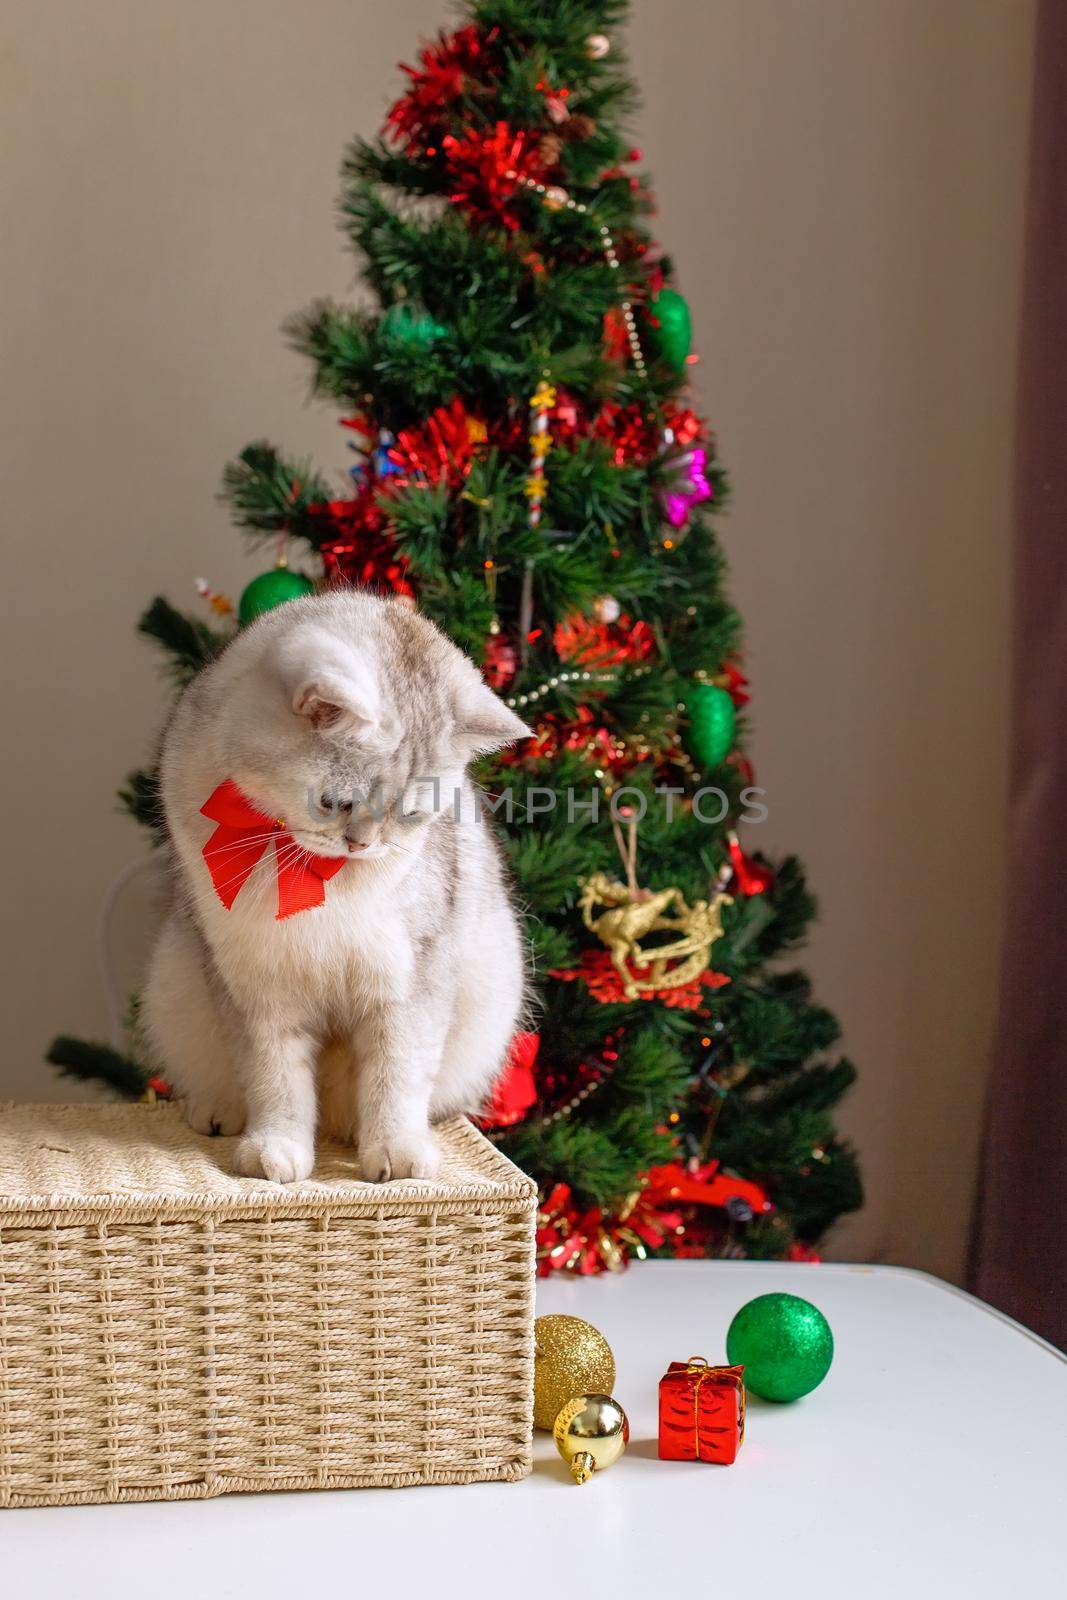 A playful white cat in a red bow tie sits on a wicker basket near the Christmas tree, plays with New Year's toys on the table.